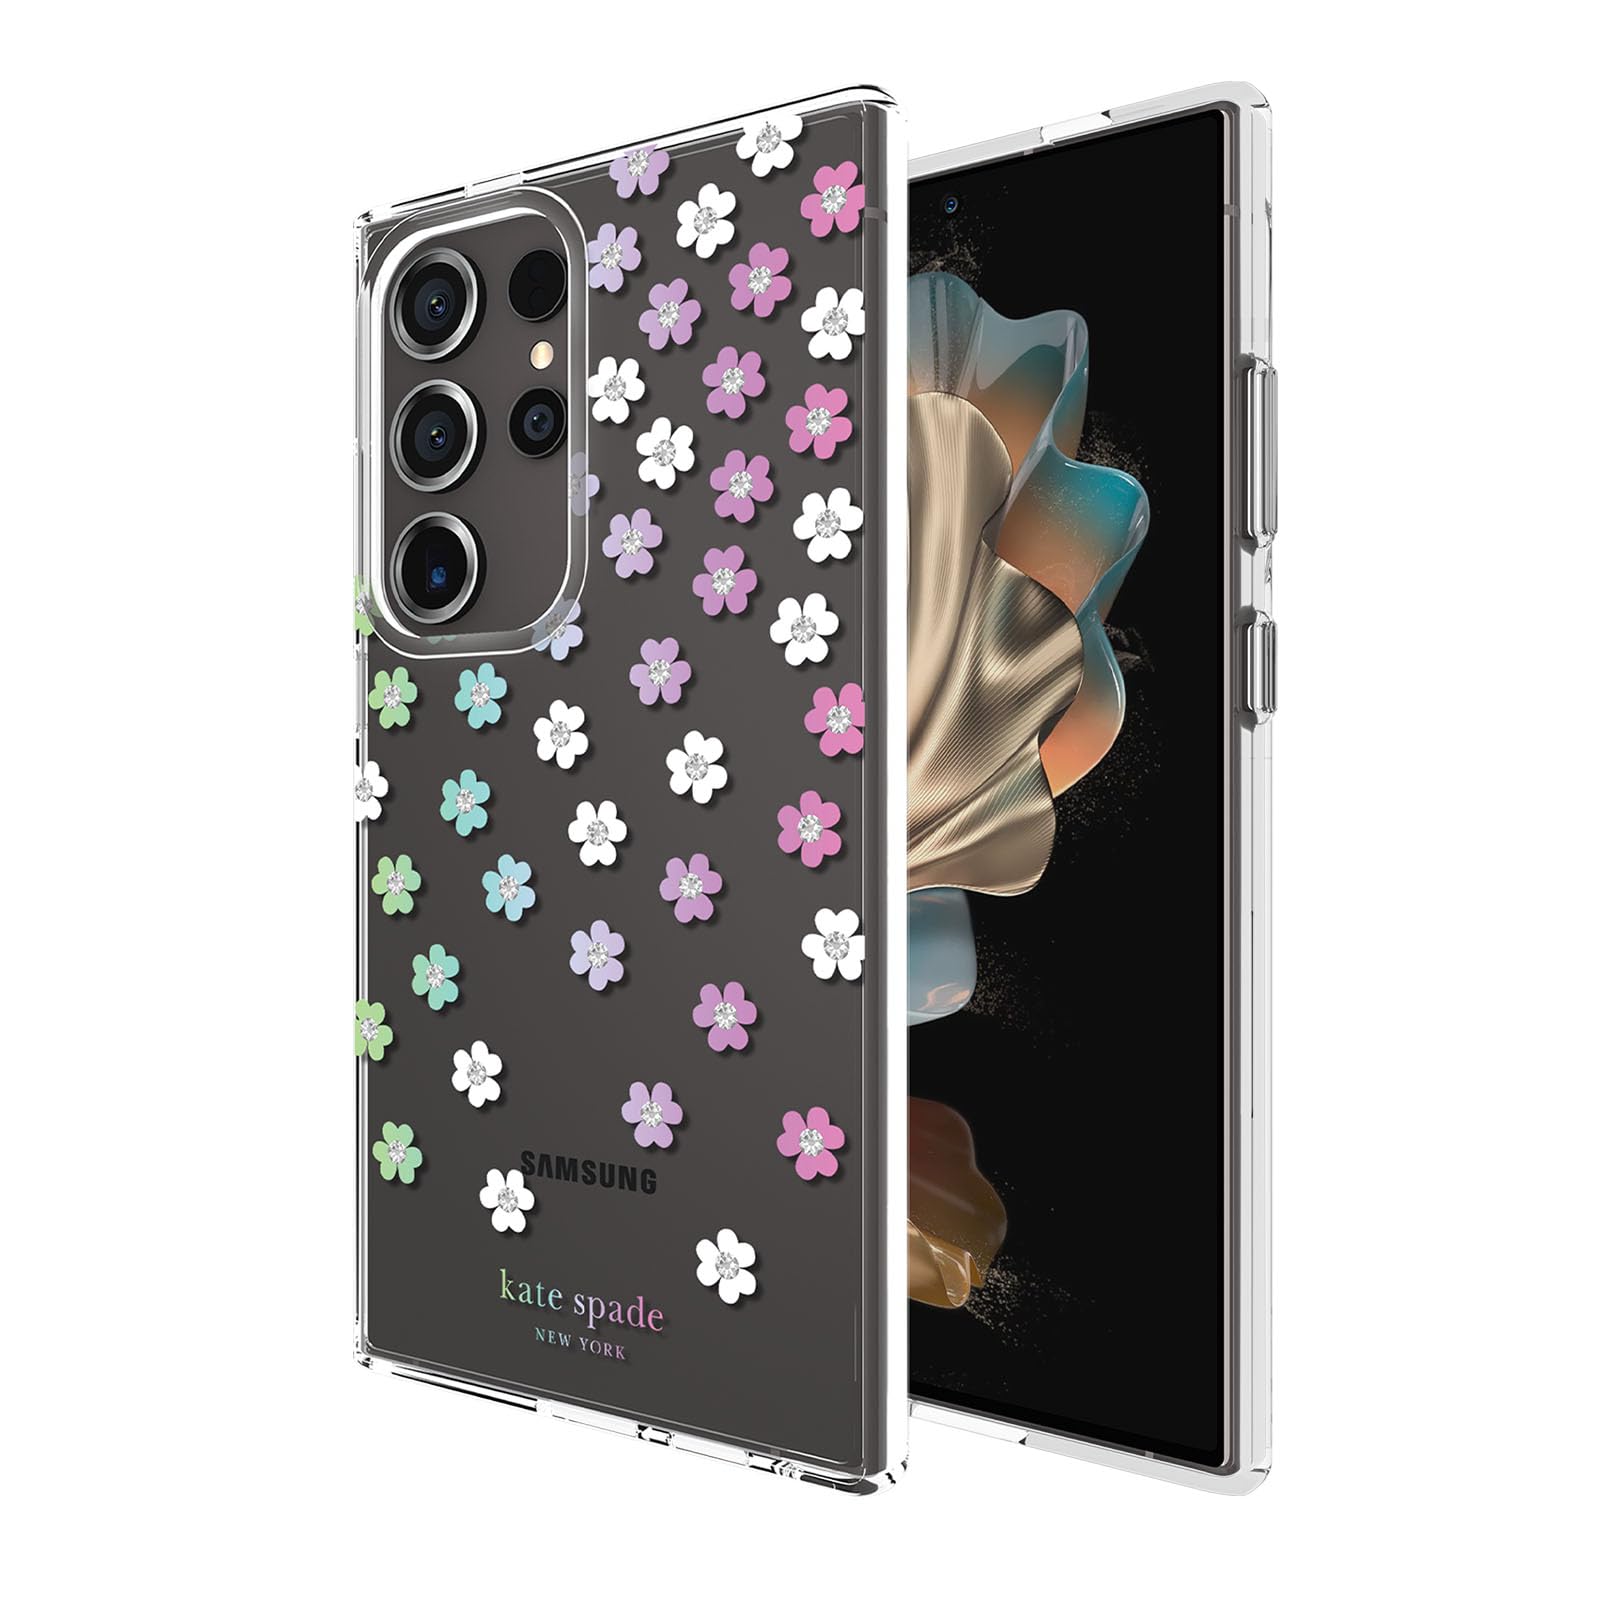 Kate Spade New York Samsung Galaxy S24 Ultra Case, Compatible with Wireless Charging - Scattered Flowers